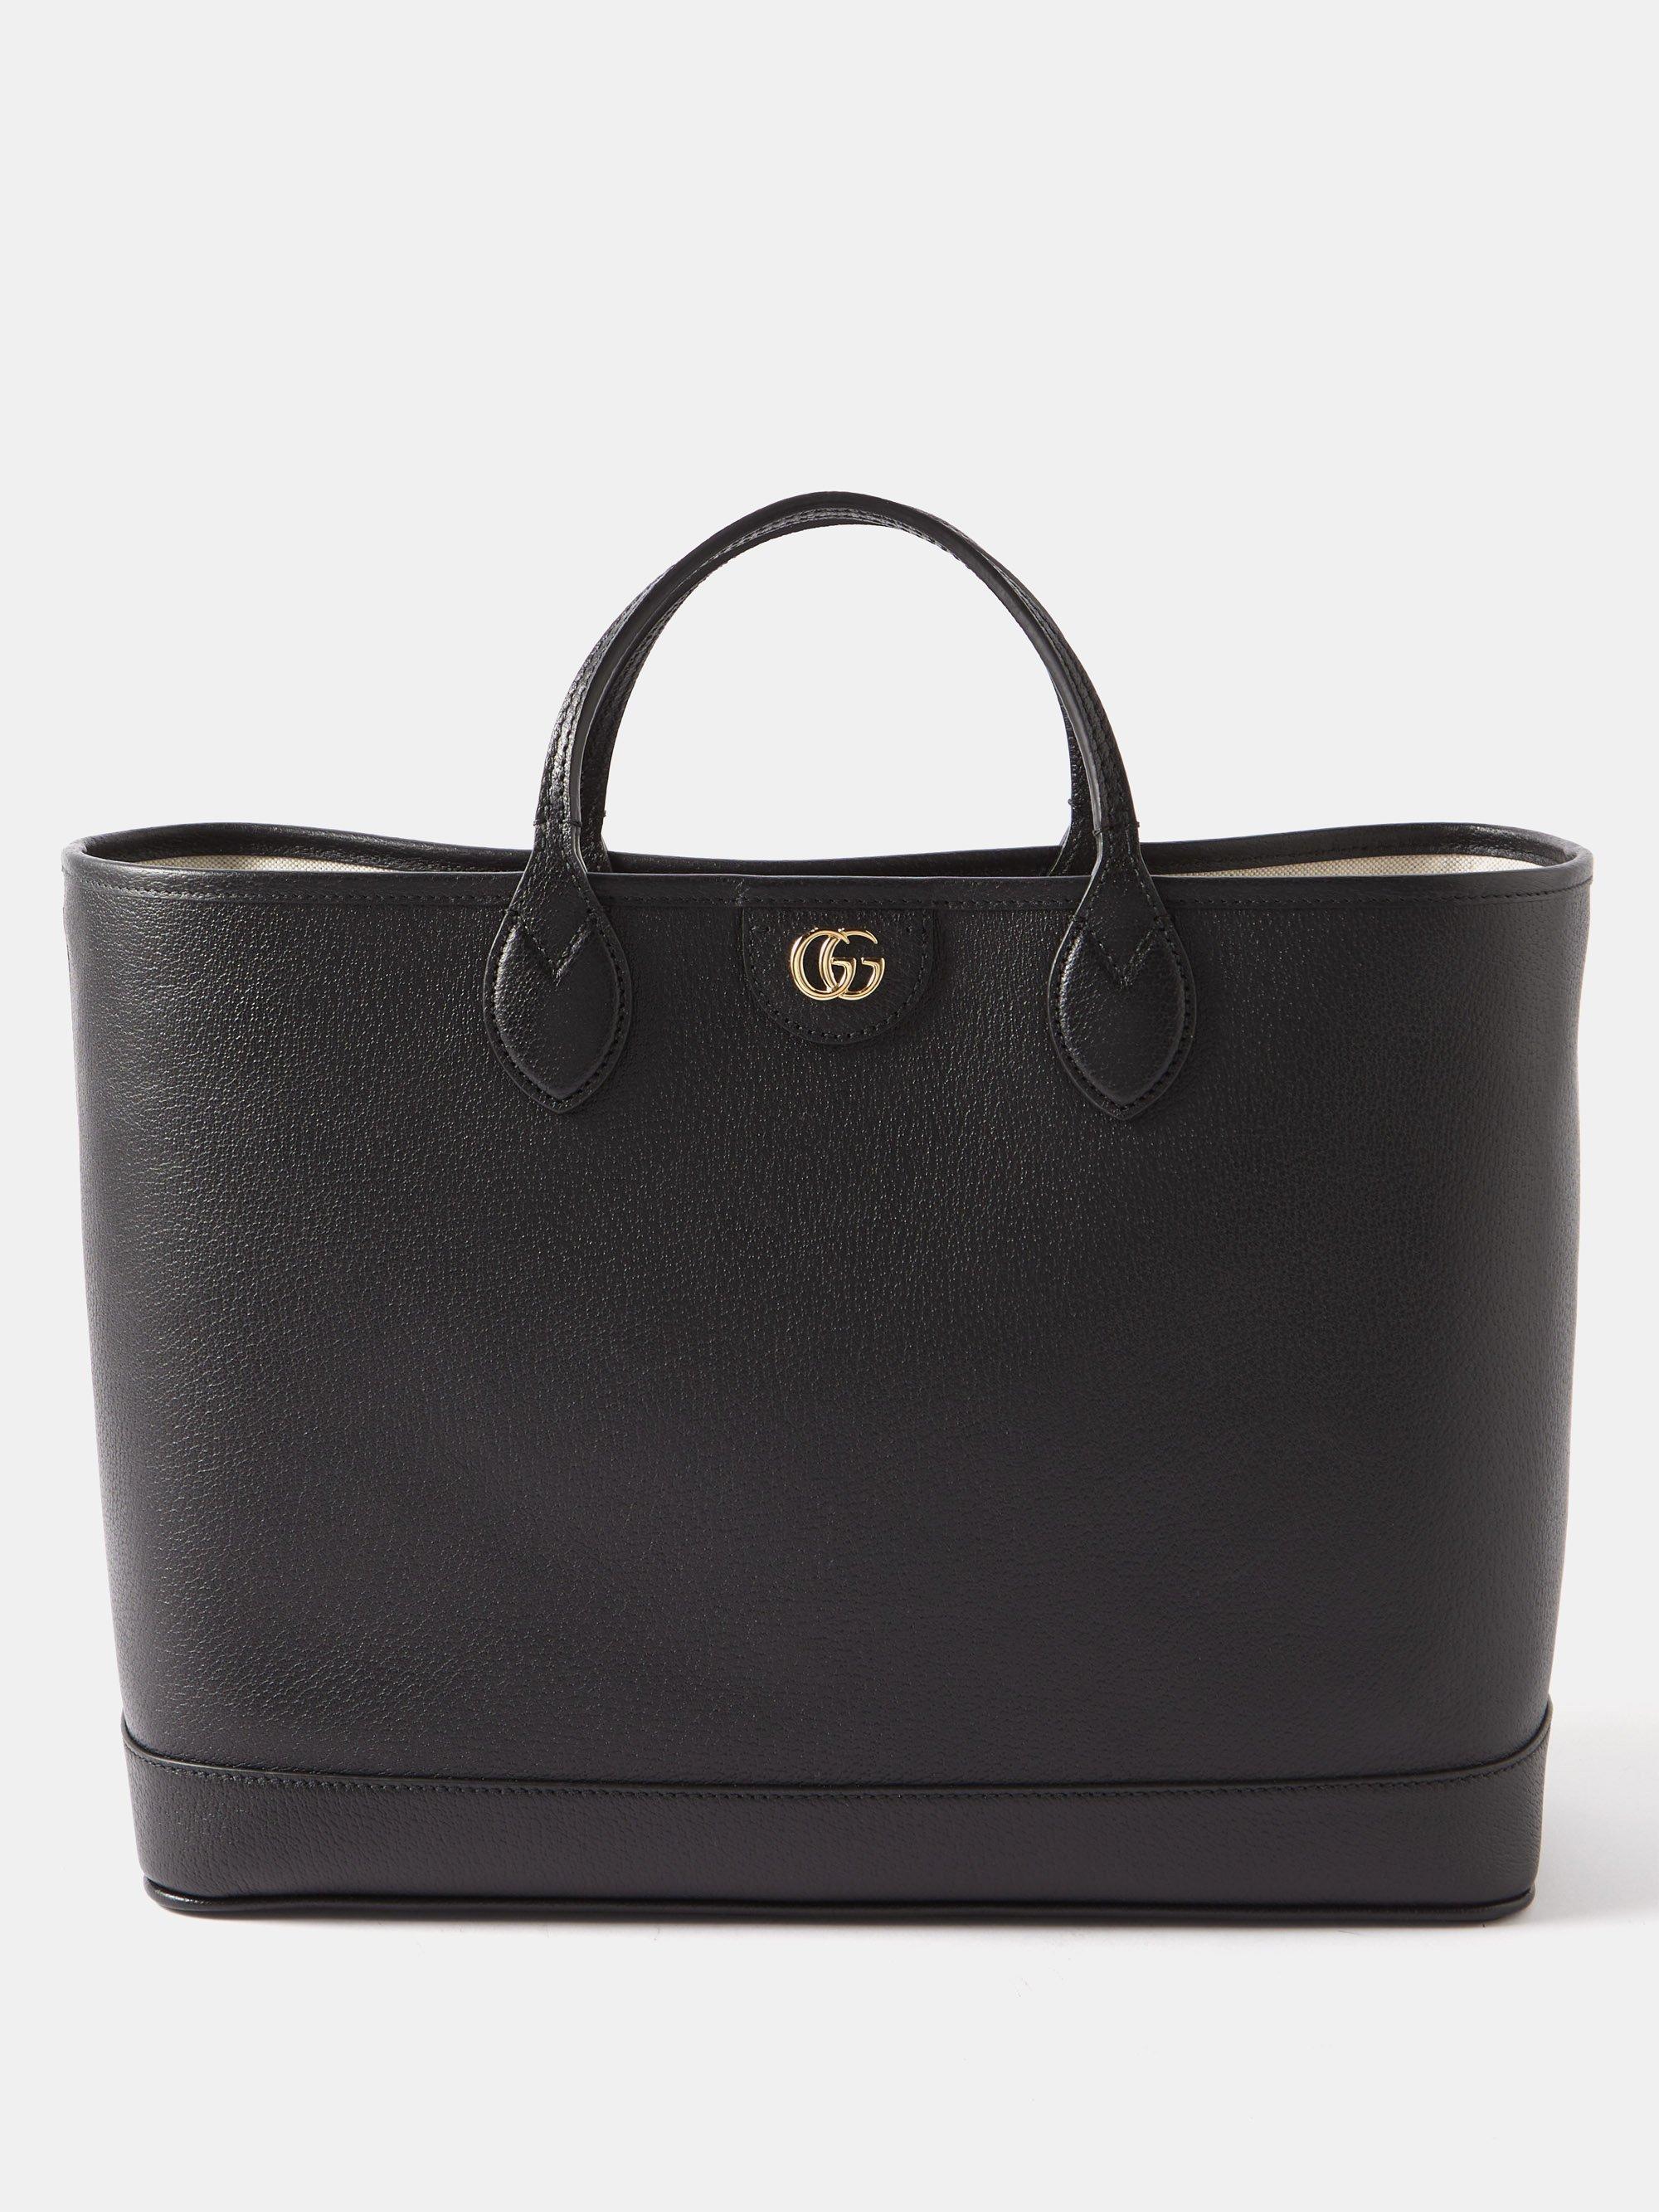 Gucci Ophidia Medium Grained-leather Tote Bag in Black | Lyst